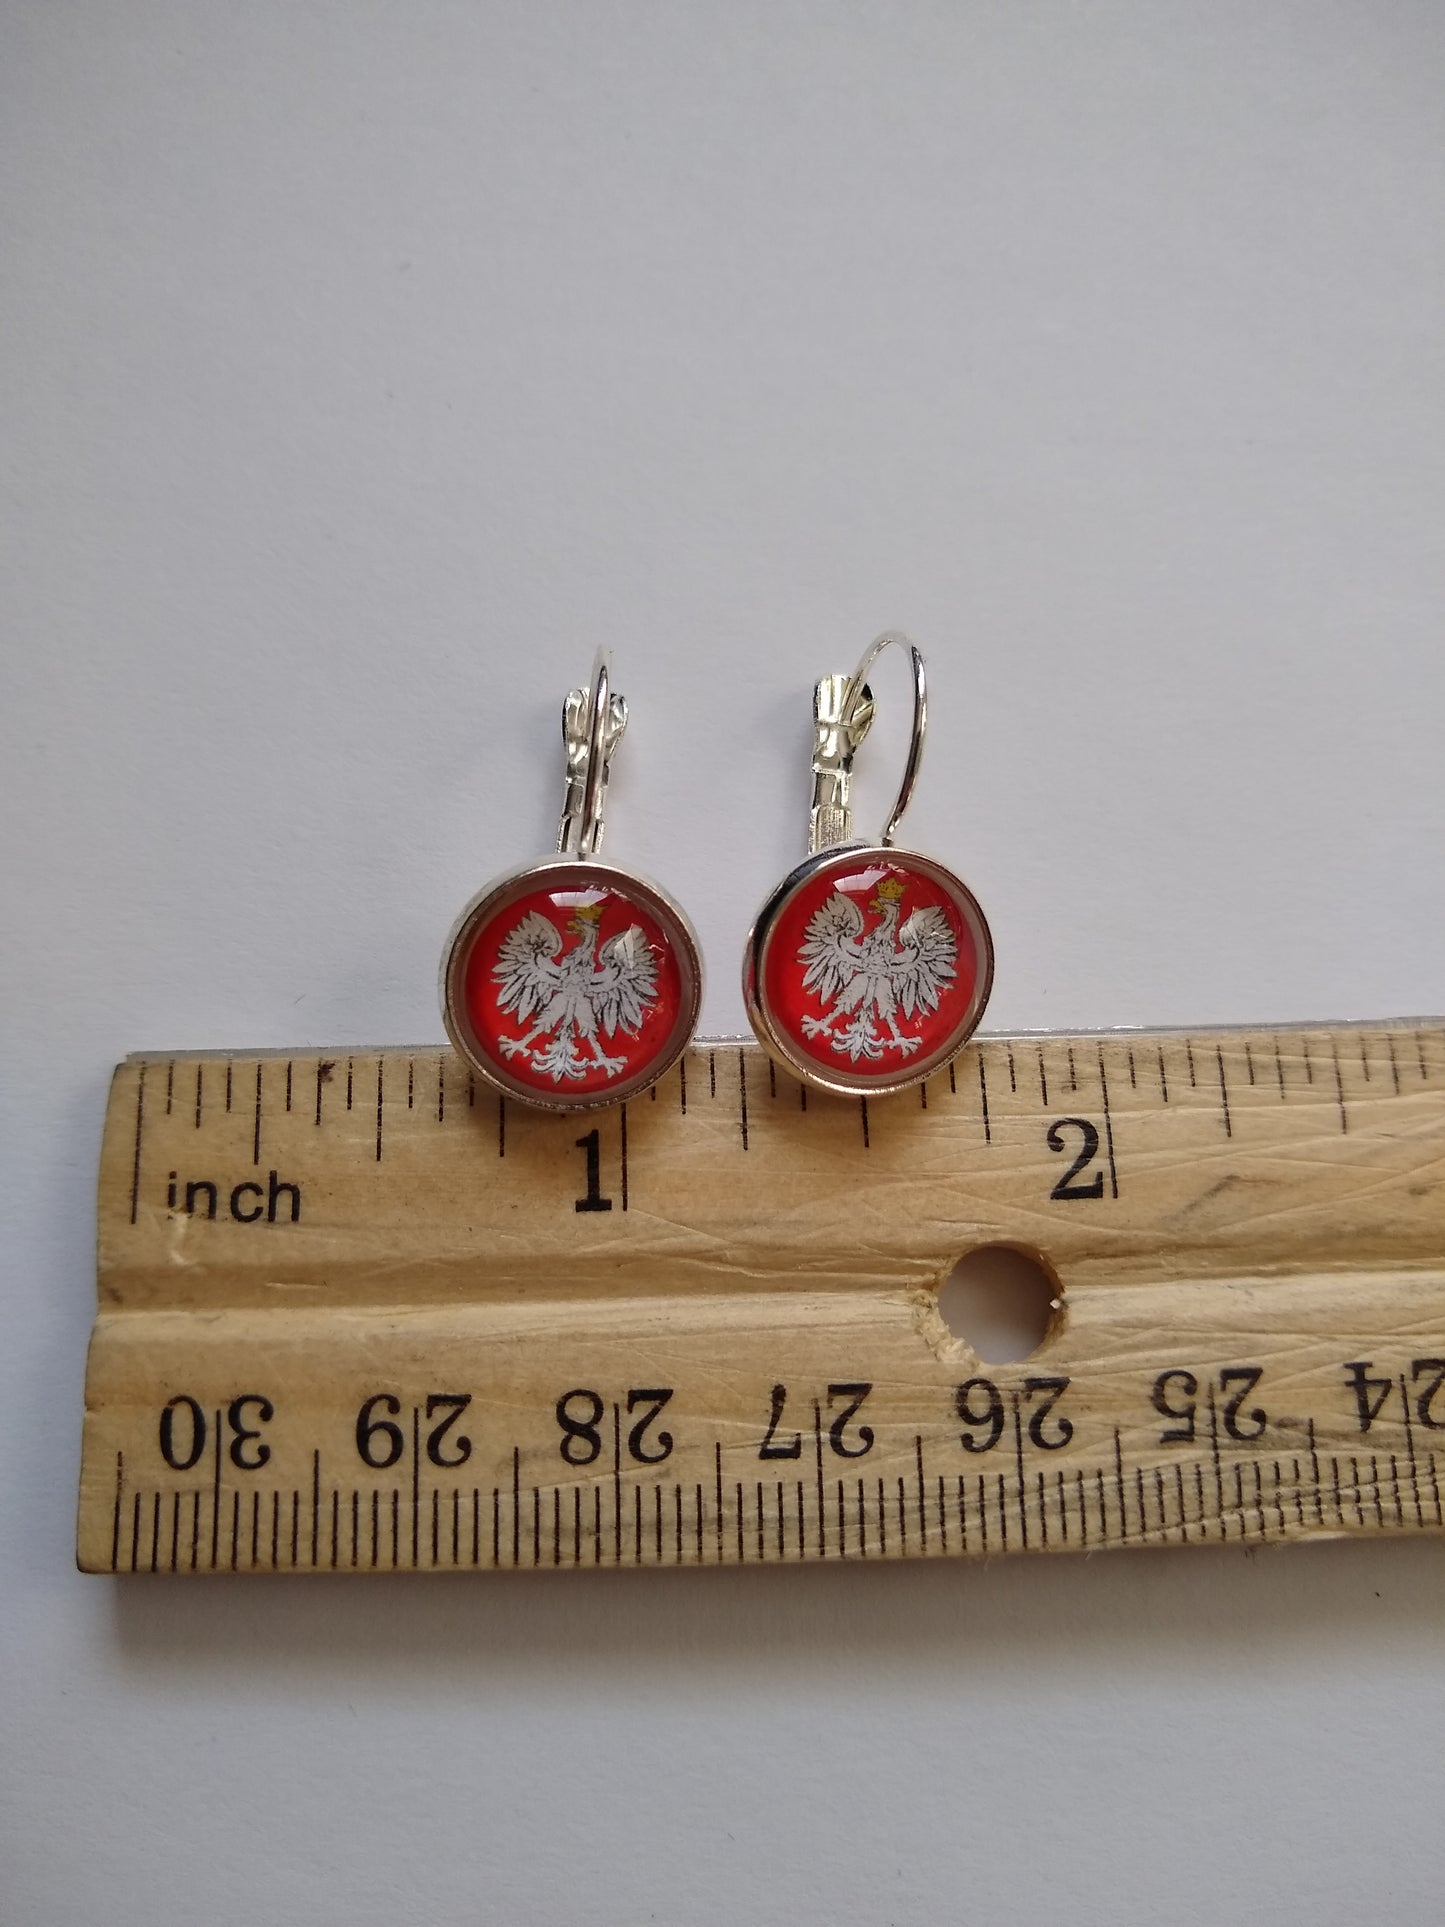 Lever back earrings with Polish Eagle with Crown with a silver colored (not real silver) base next to a ruler showing measurement.